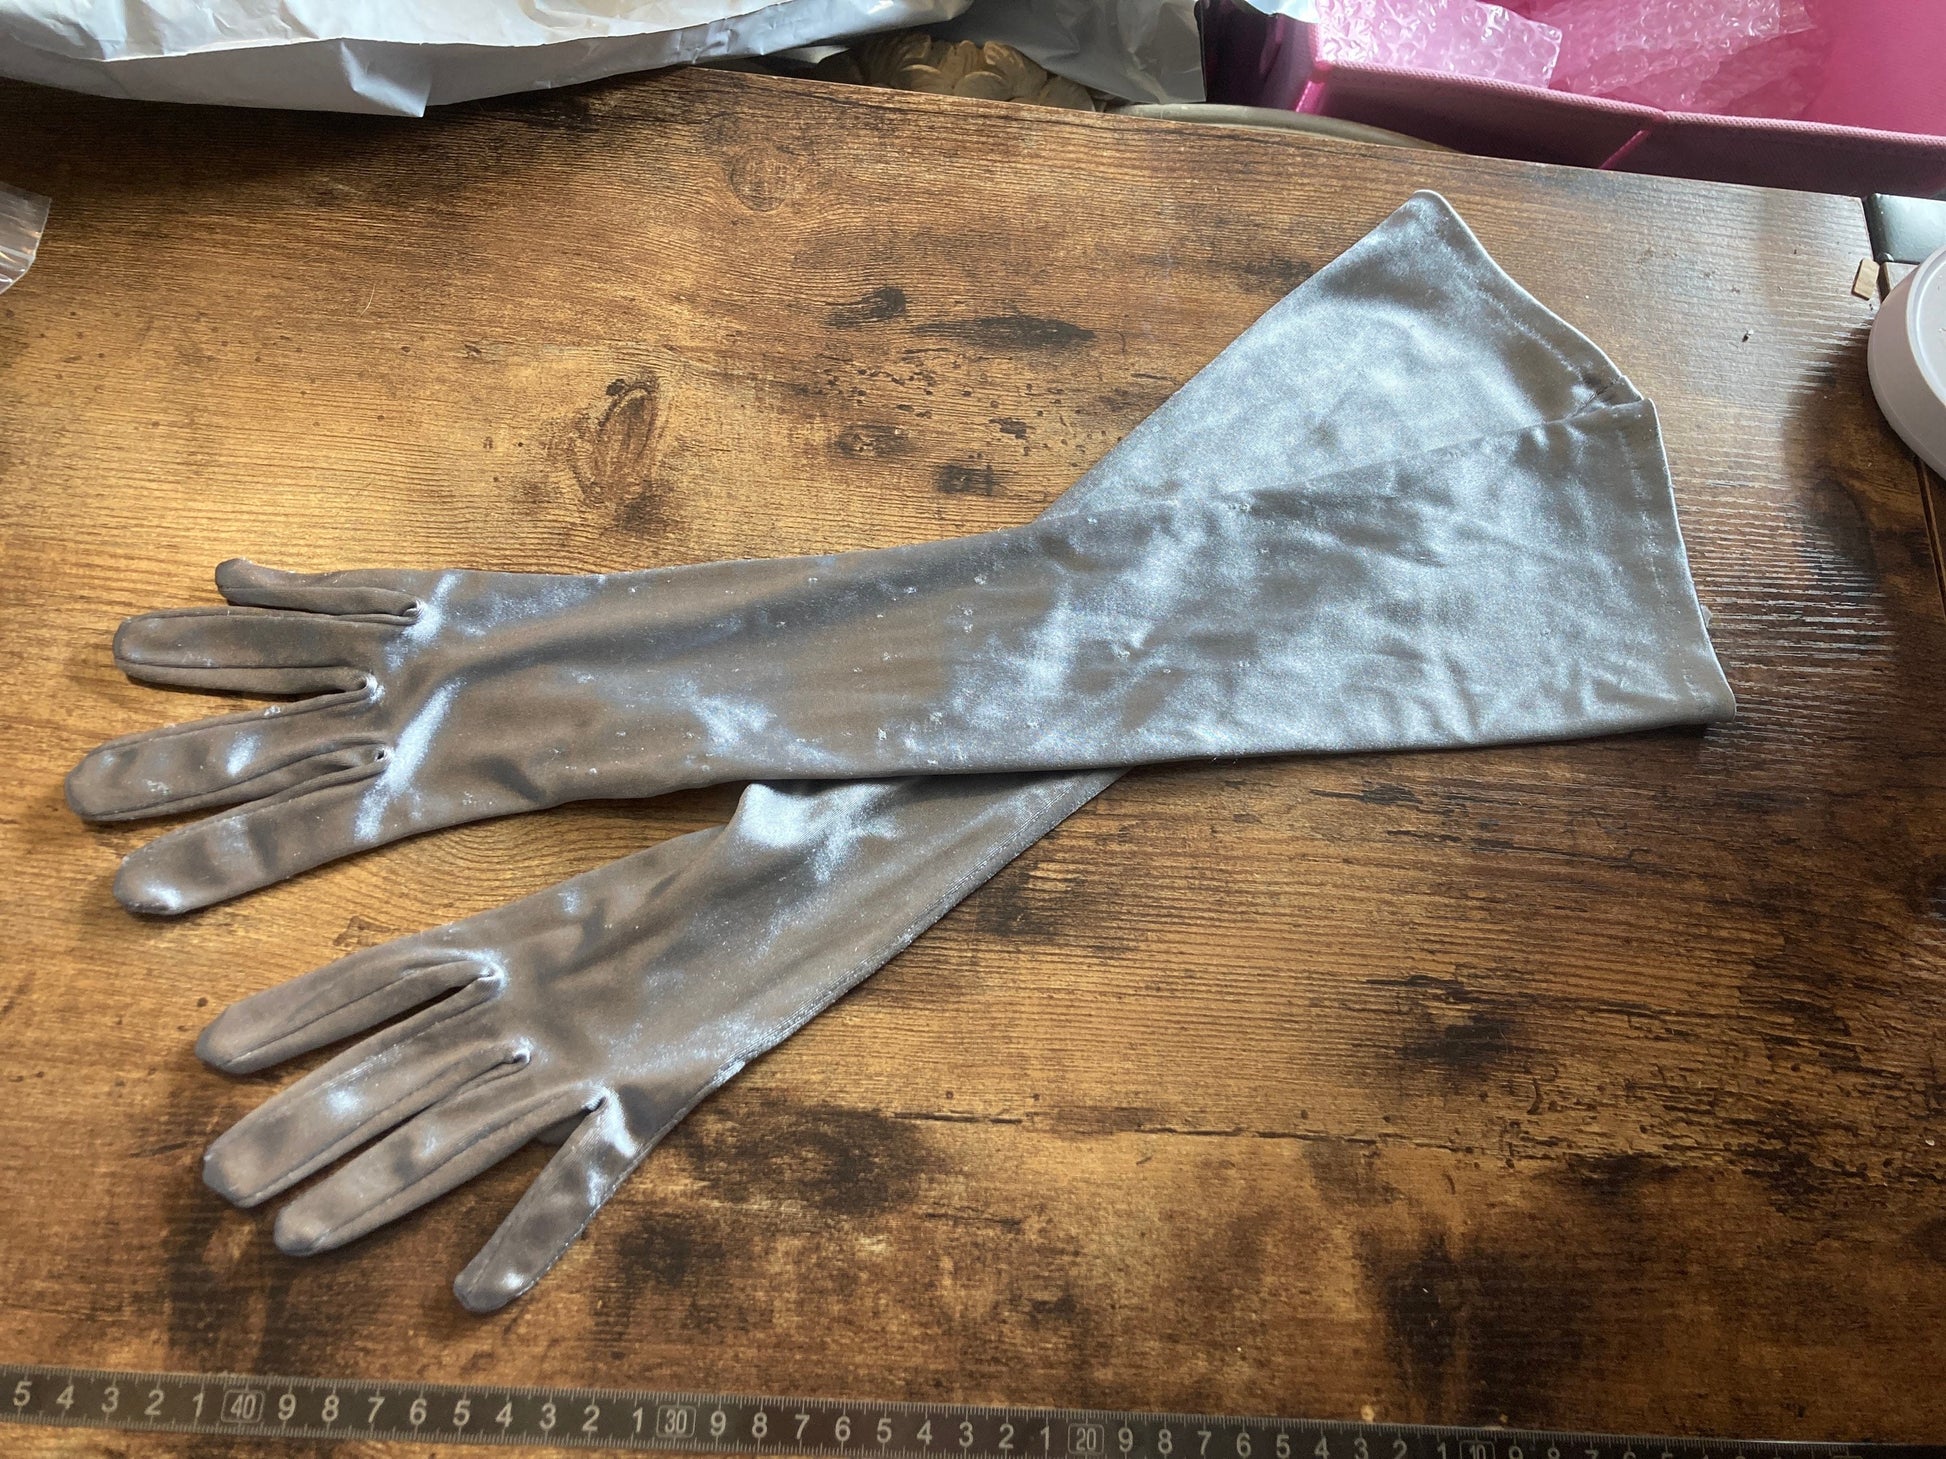 One size large 7 to 7.5 to 8 grey silver cocktail gloves 46cm